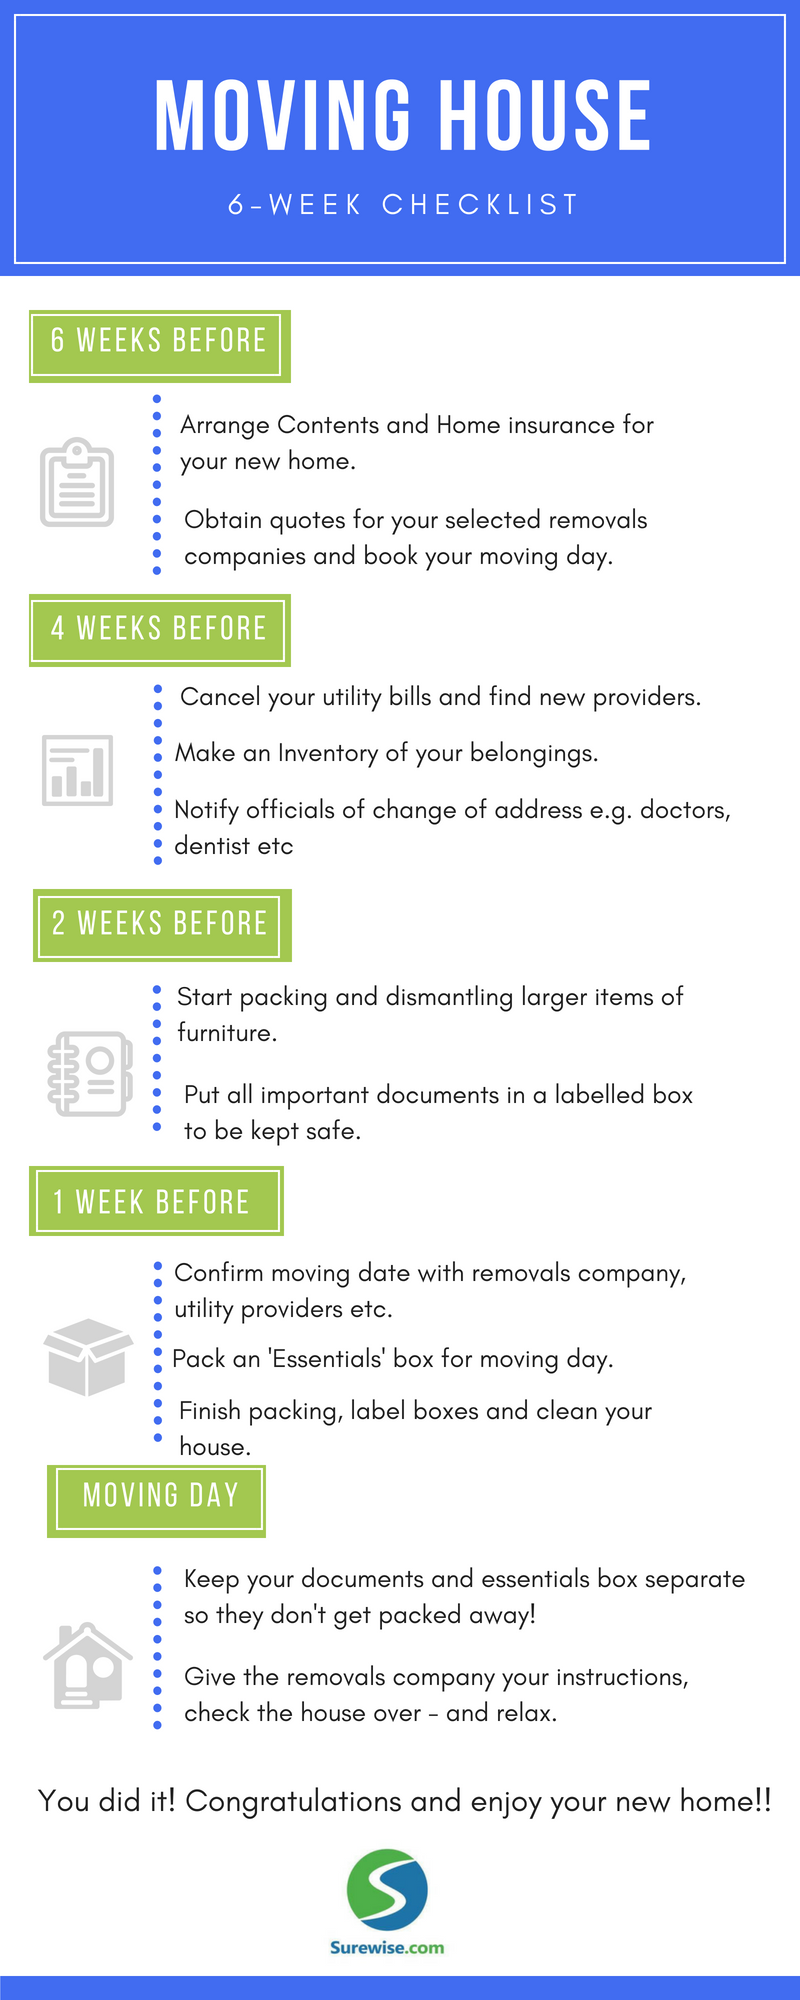 https://www.surewise.com/wp-content/uploads/2018/07/Moving-House-Checklist.png